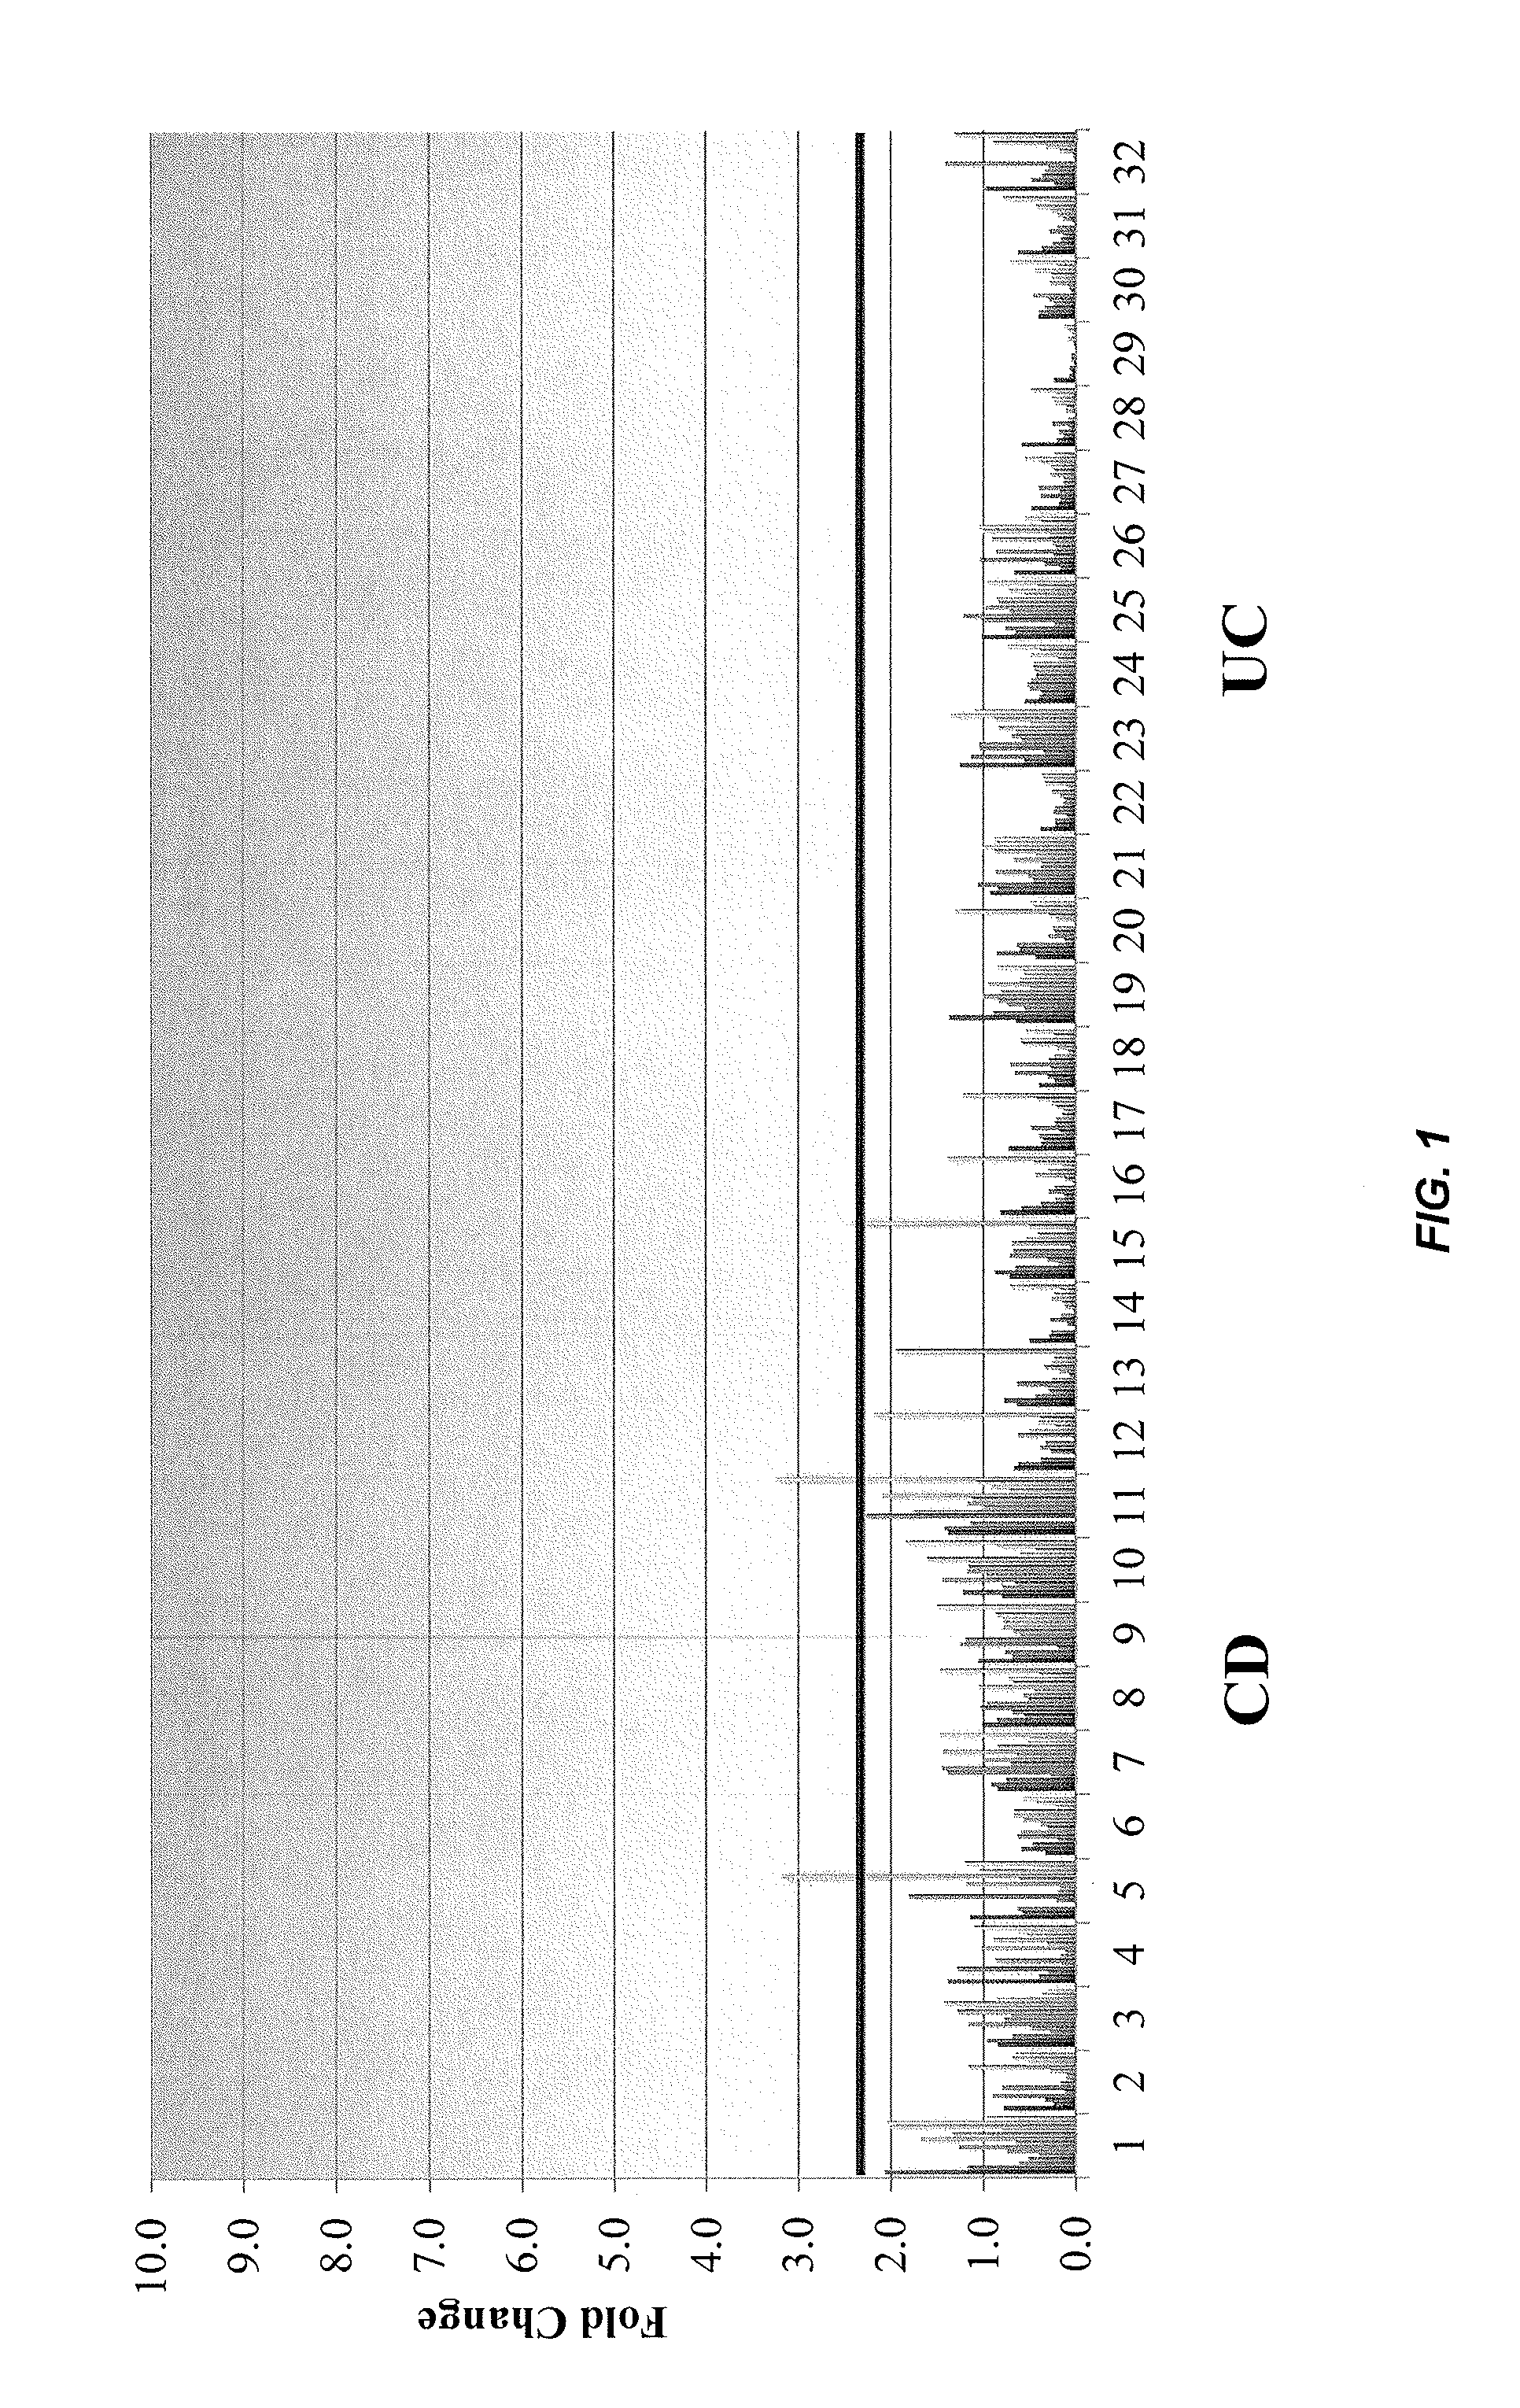 Methods for identifying inflammatory bowel disease patients with dysplasia or cancer